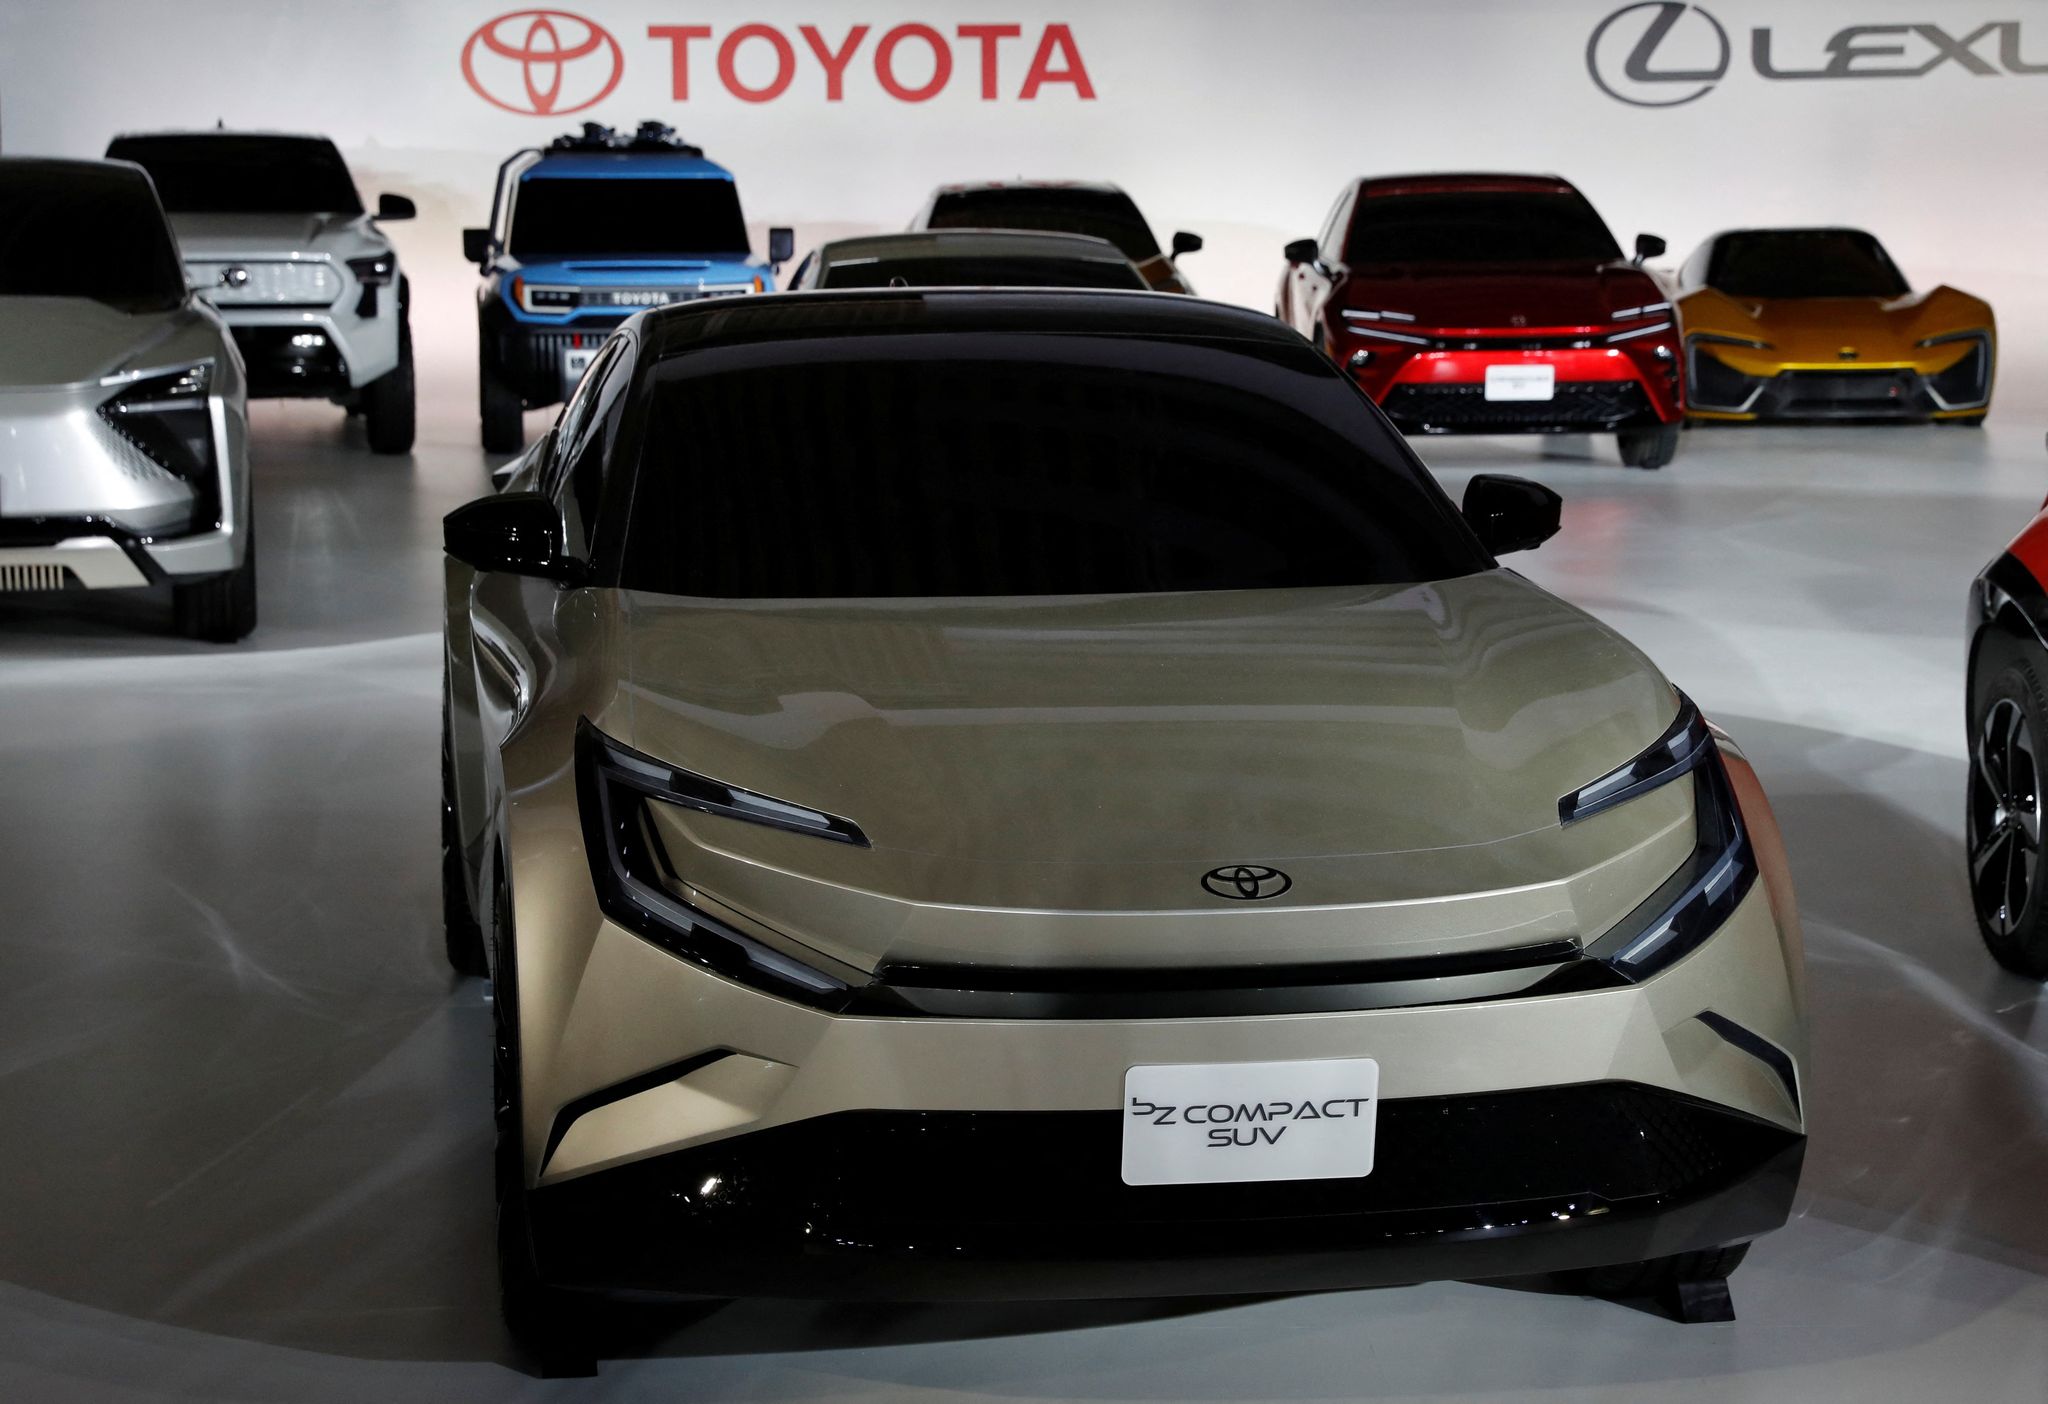 Toyota Motor Corporation's bZ Compact SUV is pictured after a briefing on the company's strategies on battery EVs in Tokyo, Japan, December 14, 2021. Photo: Reuters